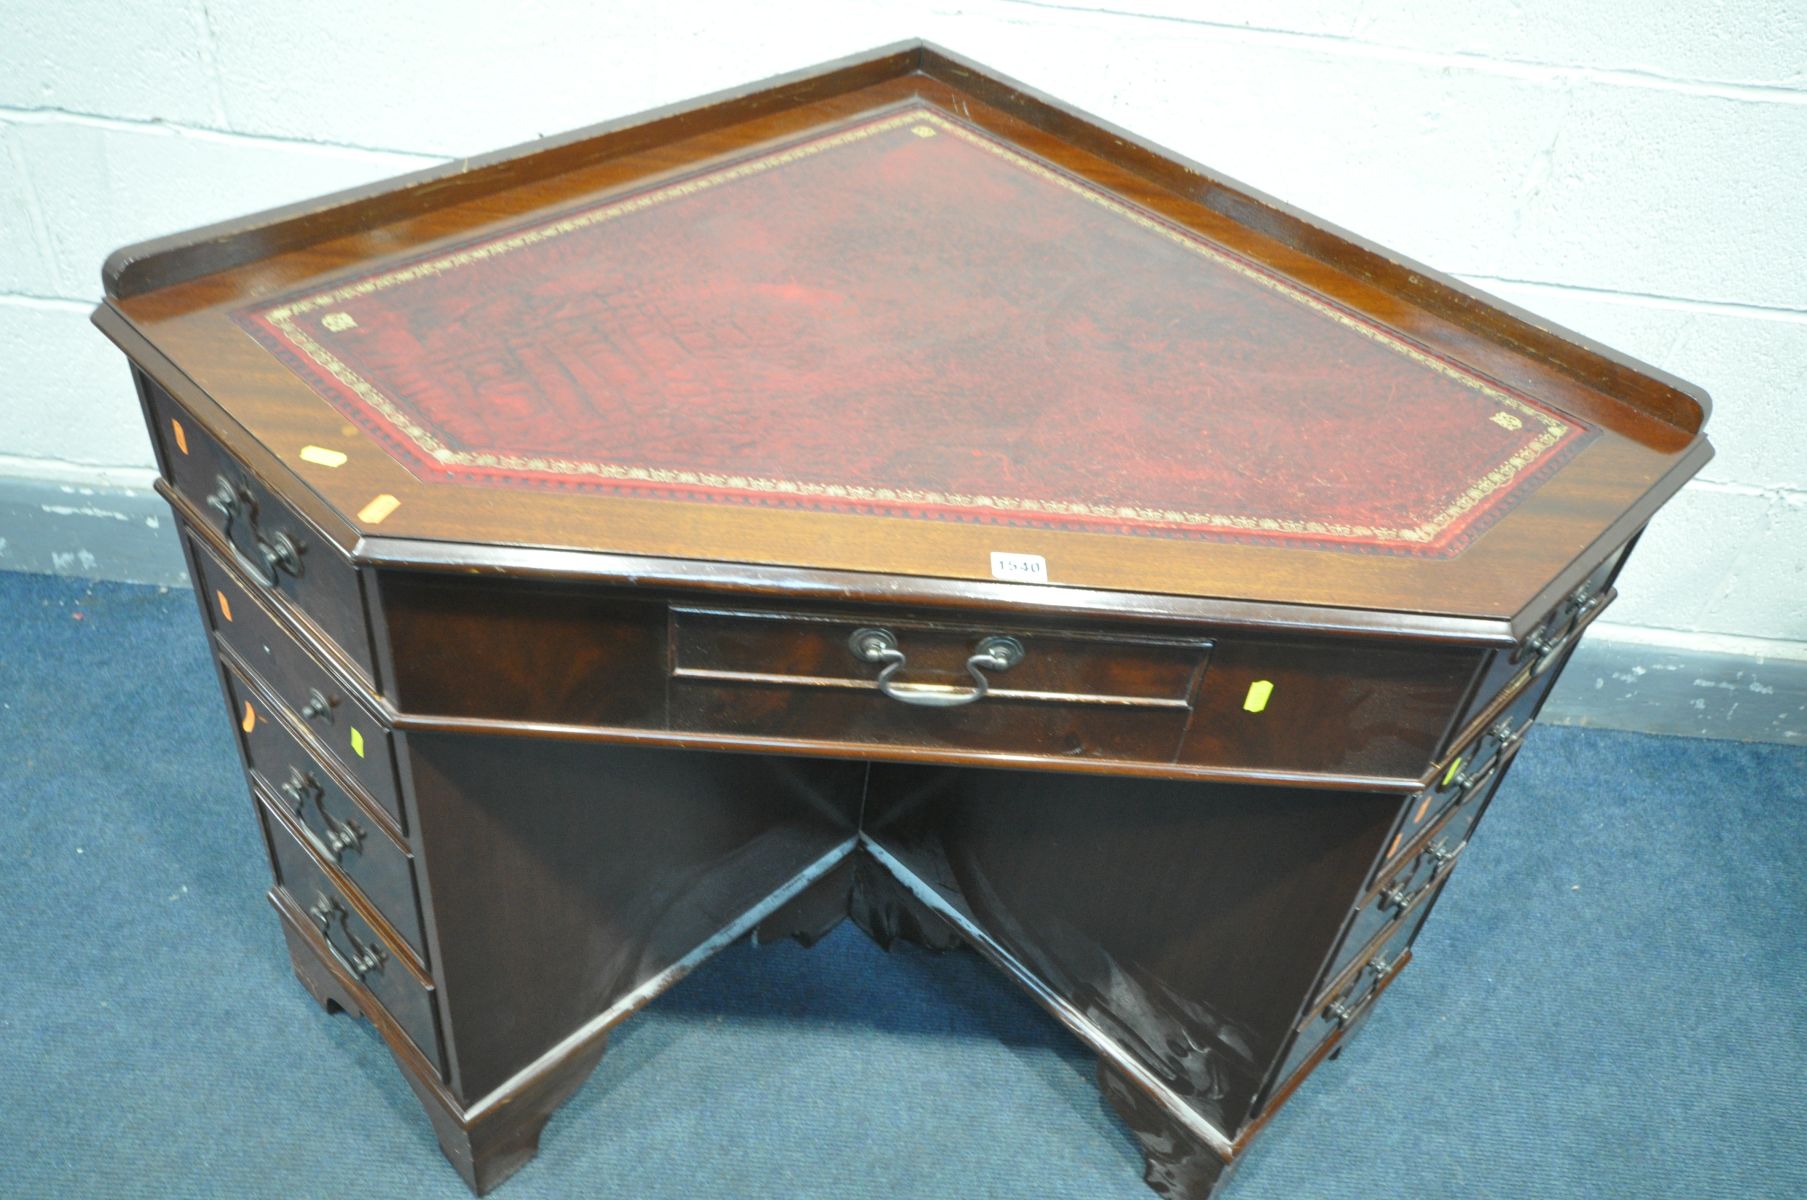 A MAHOGANY CORNER PEDESTAL DESK, with a burgundy leather and gilt tooled inlay top, and an